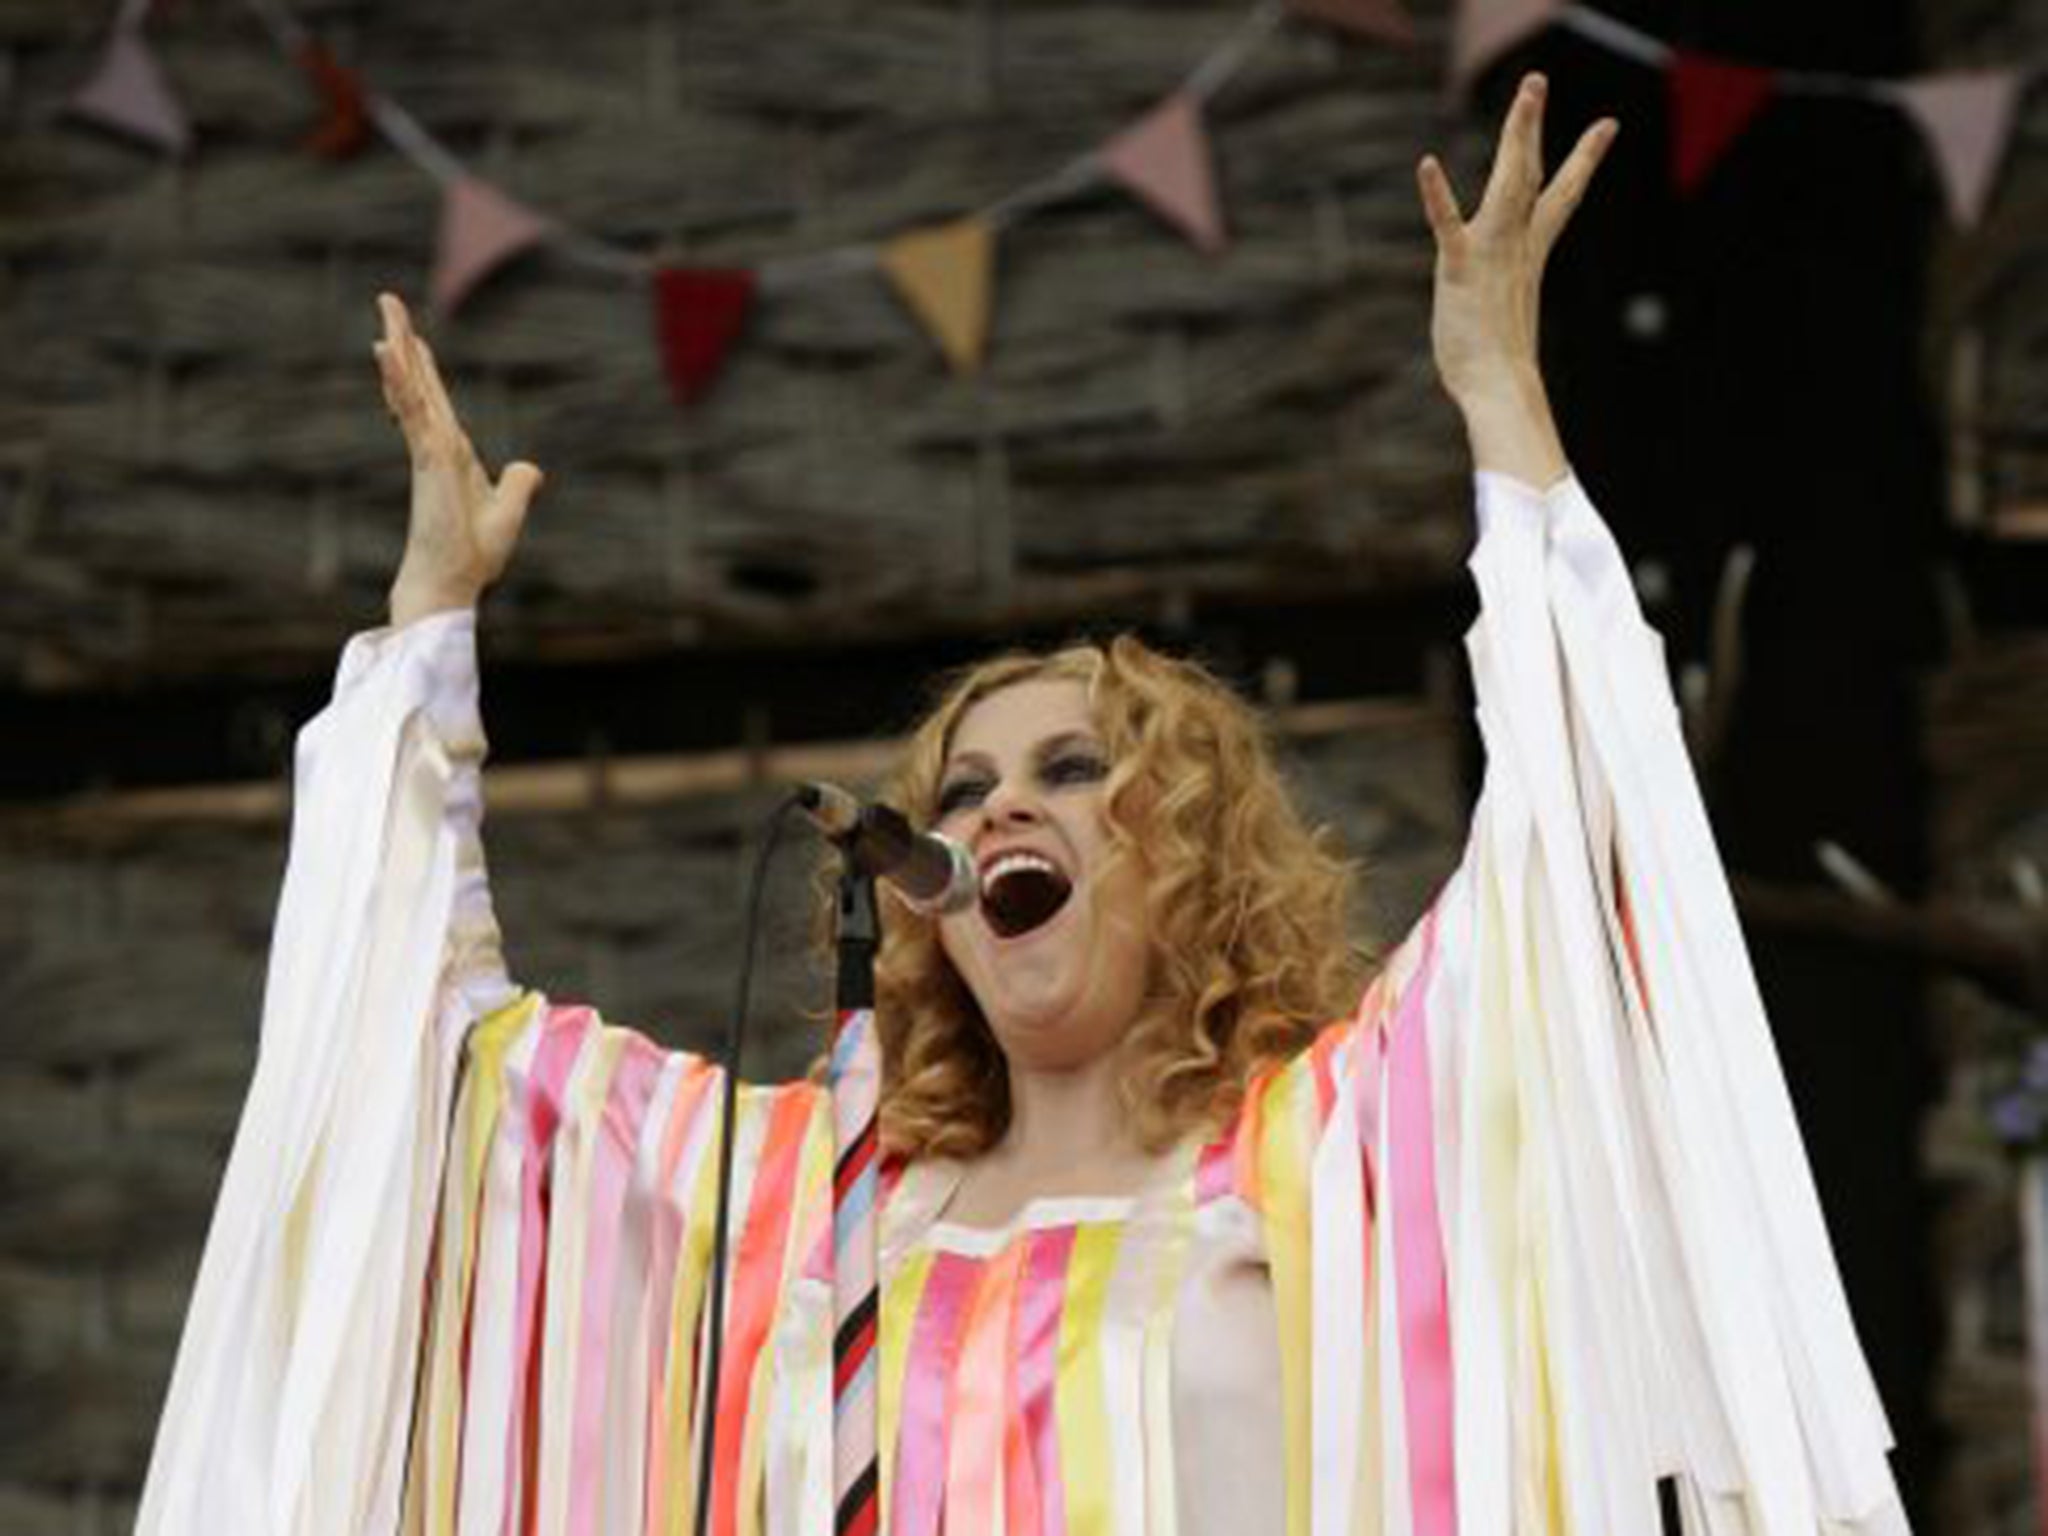 Alison Goldfrapp is among those who have been included in the latest edition of Who's Who